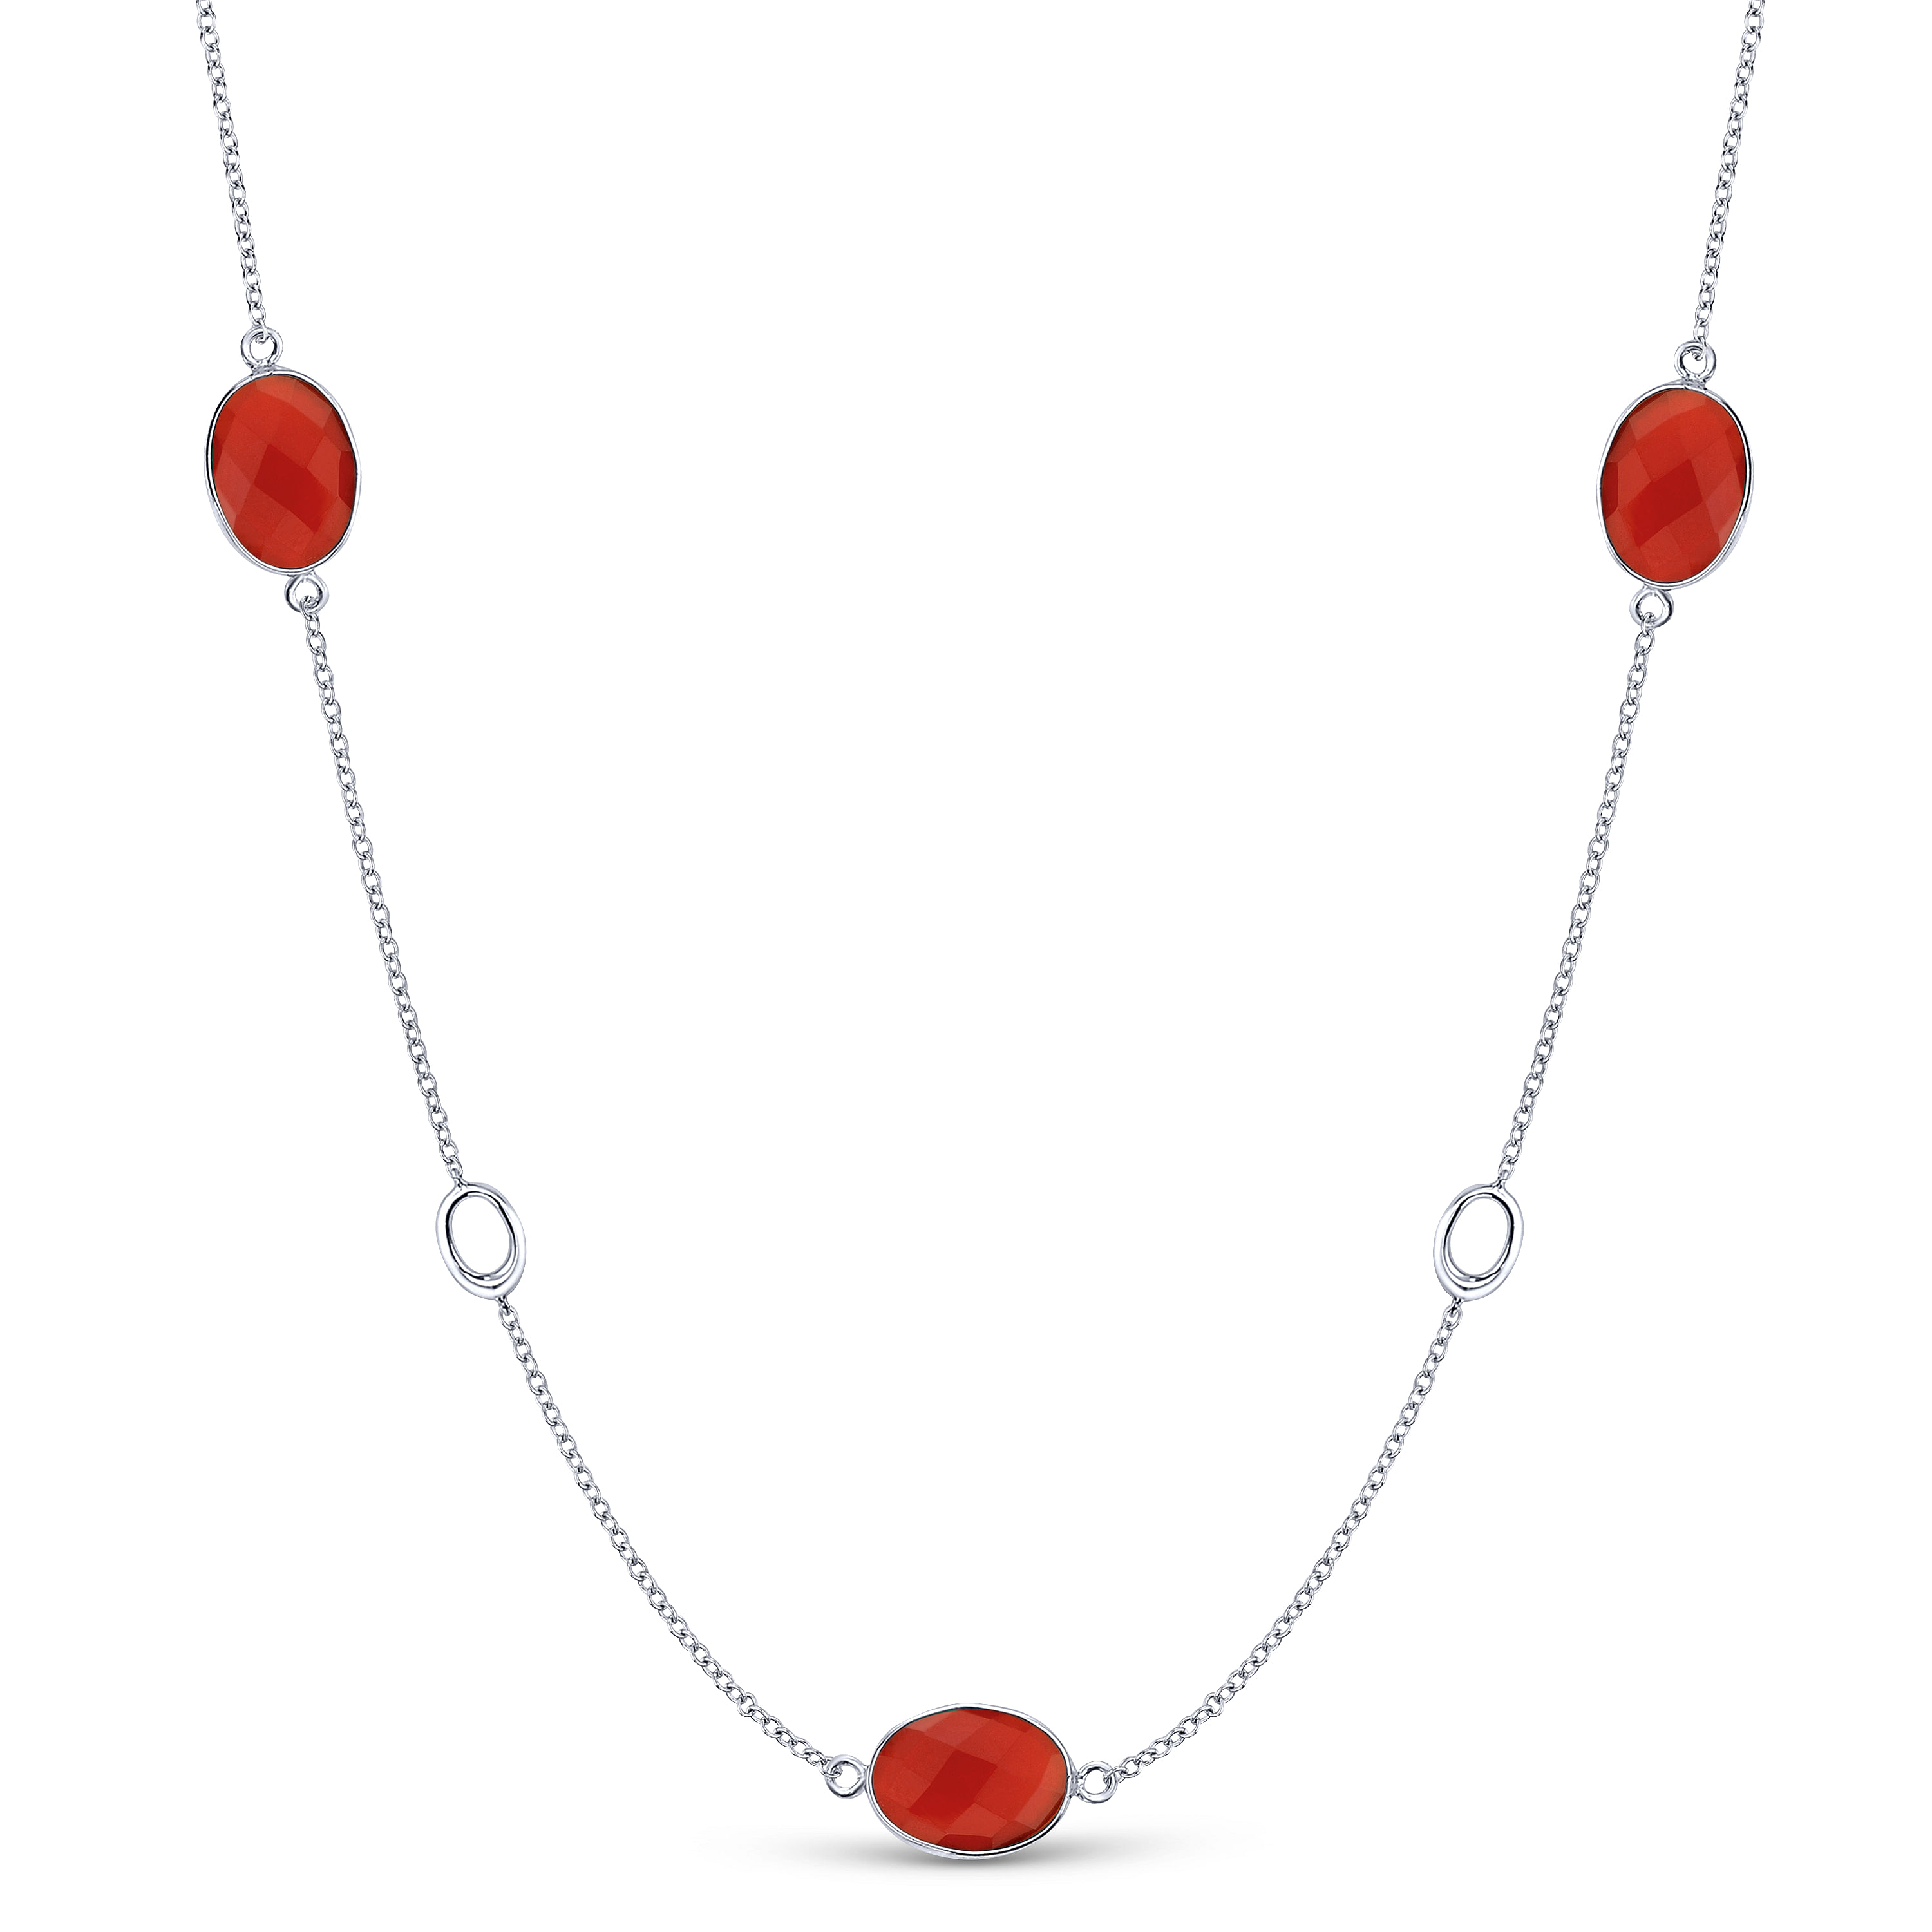 36 inch 925 Sterling Silver Oval Red Onyx Station Necklace